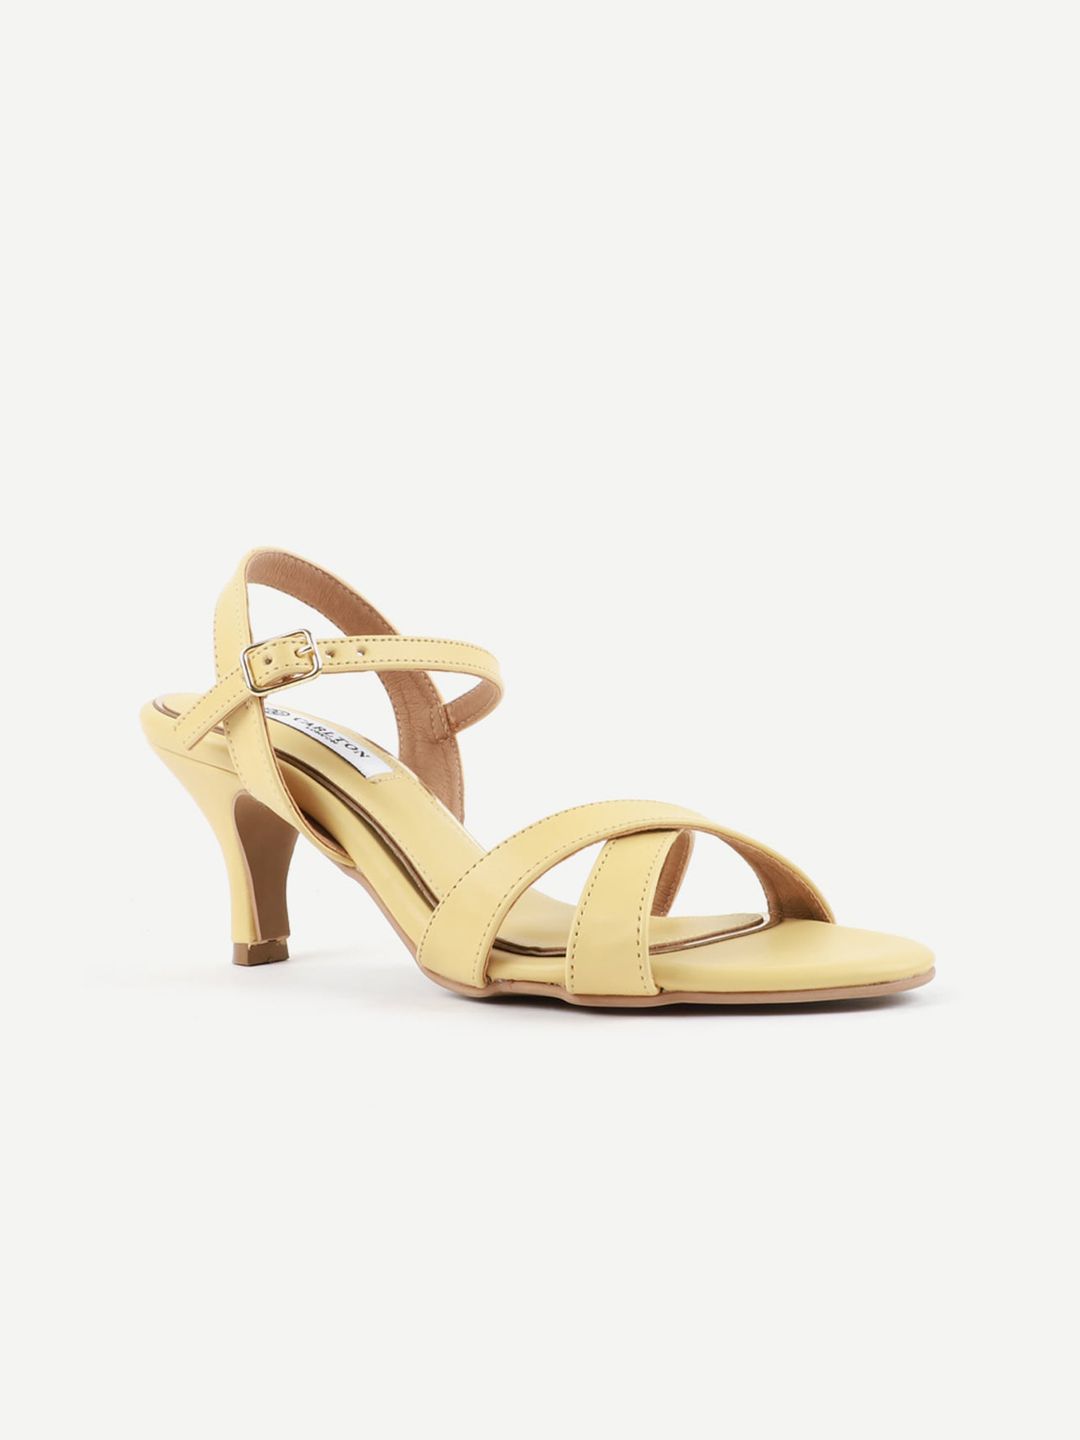 Carlton London Yellow Sandals with Buckles Price in India